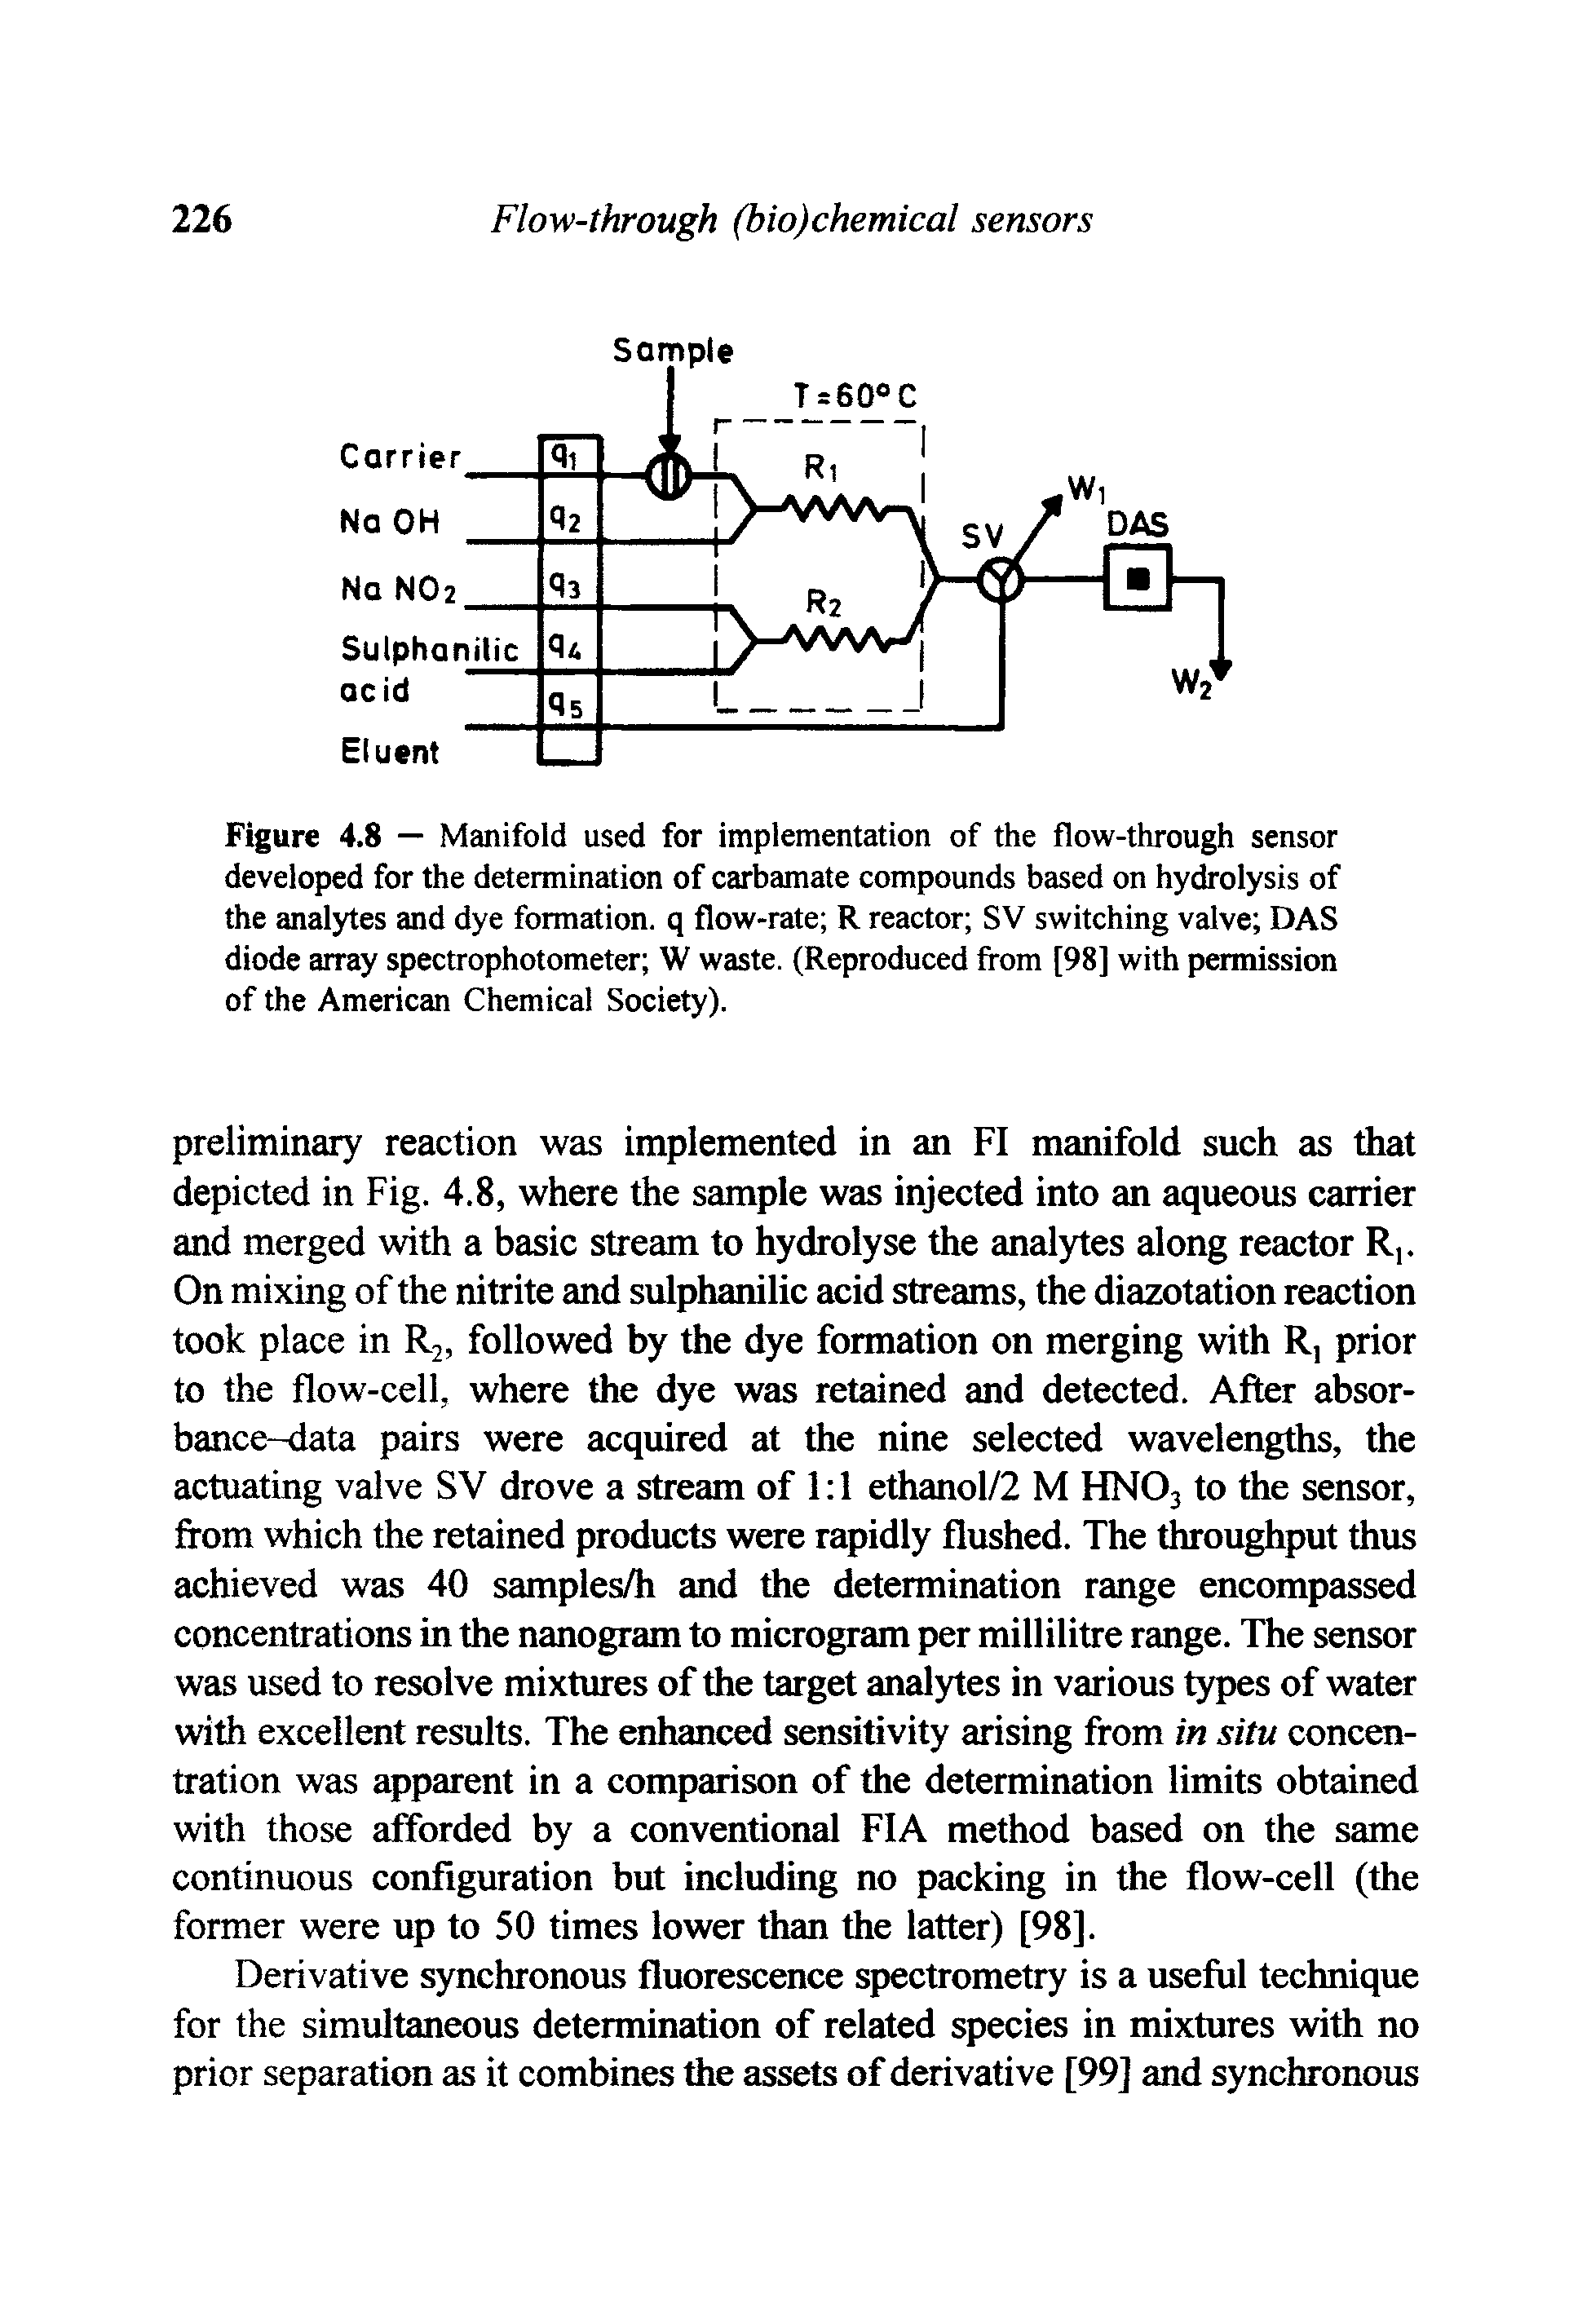 Figure 4.8 — Manifold used for implementation of the flow-through sensor developed for the determination of carbamate compounds based on hydrolysis of the analytes and dye formation, q flow-rate R reactor SV switching valve DAS diode array spectrophotometer W waste. (Reproduced from [98] with permission of the American Chemical Society).